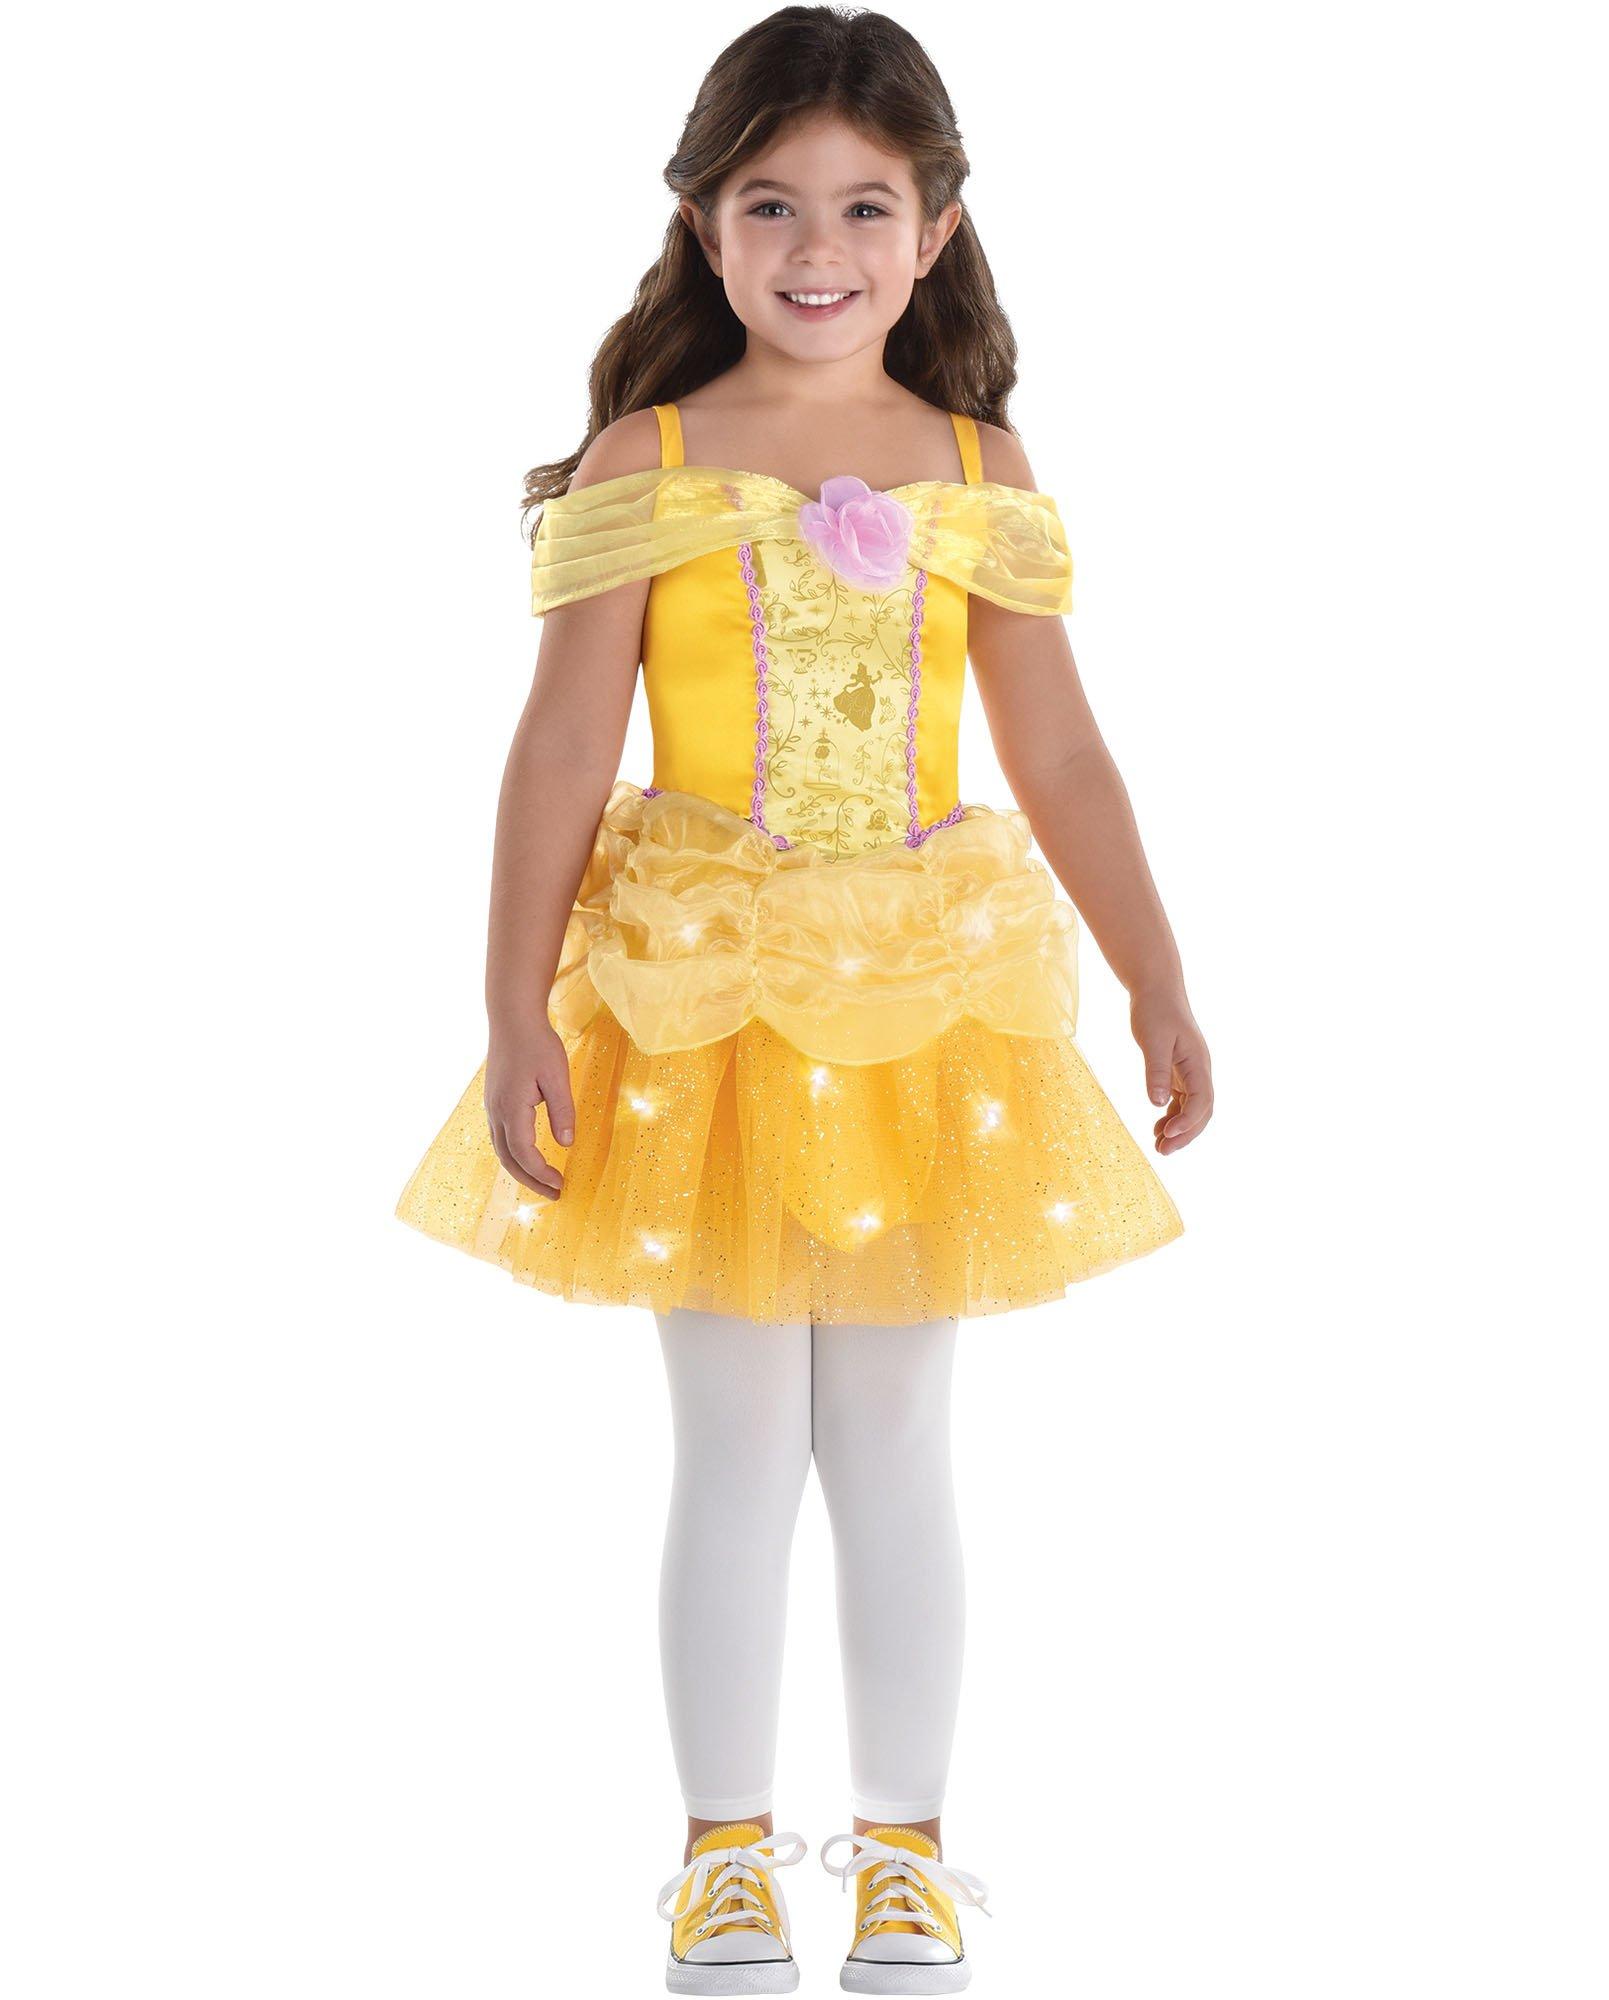 beauty and the beast belle pink dress